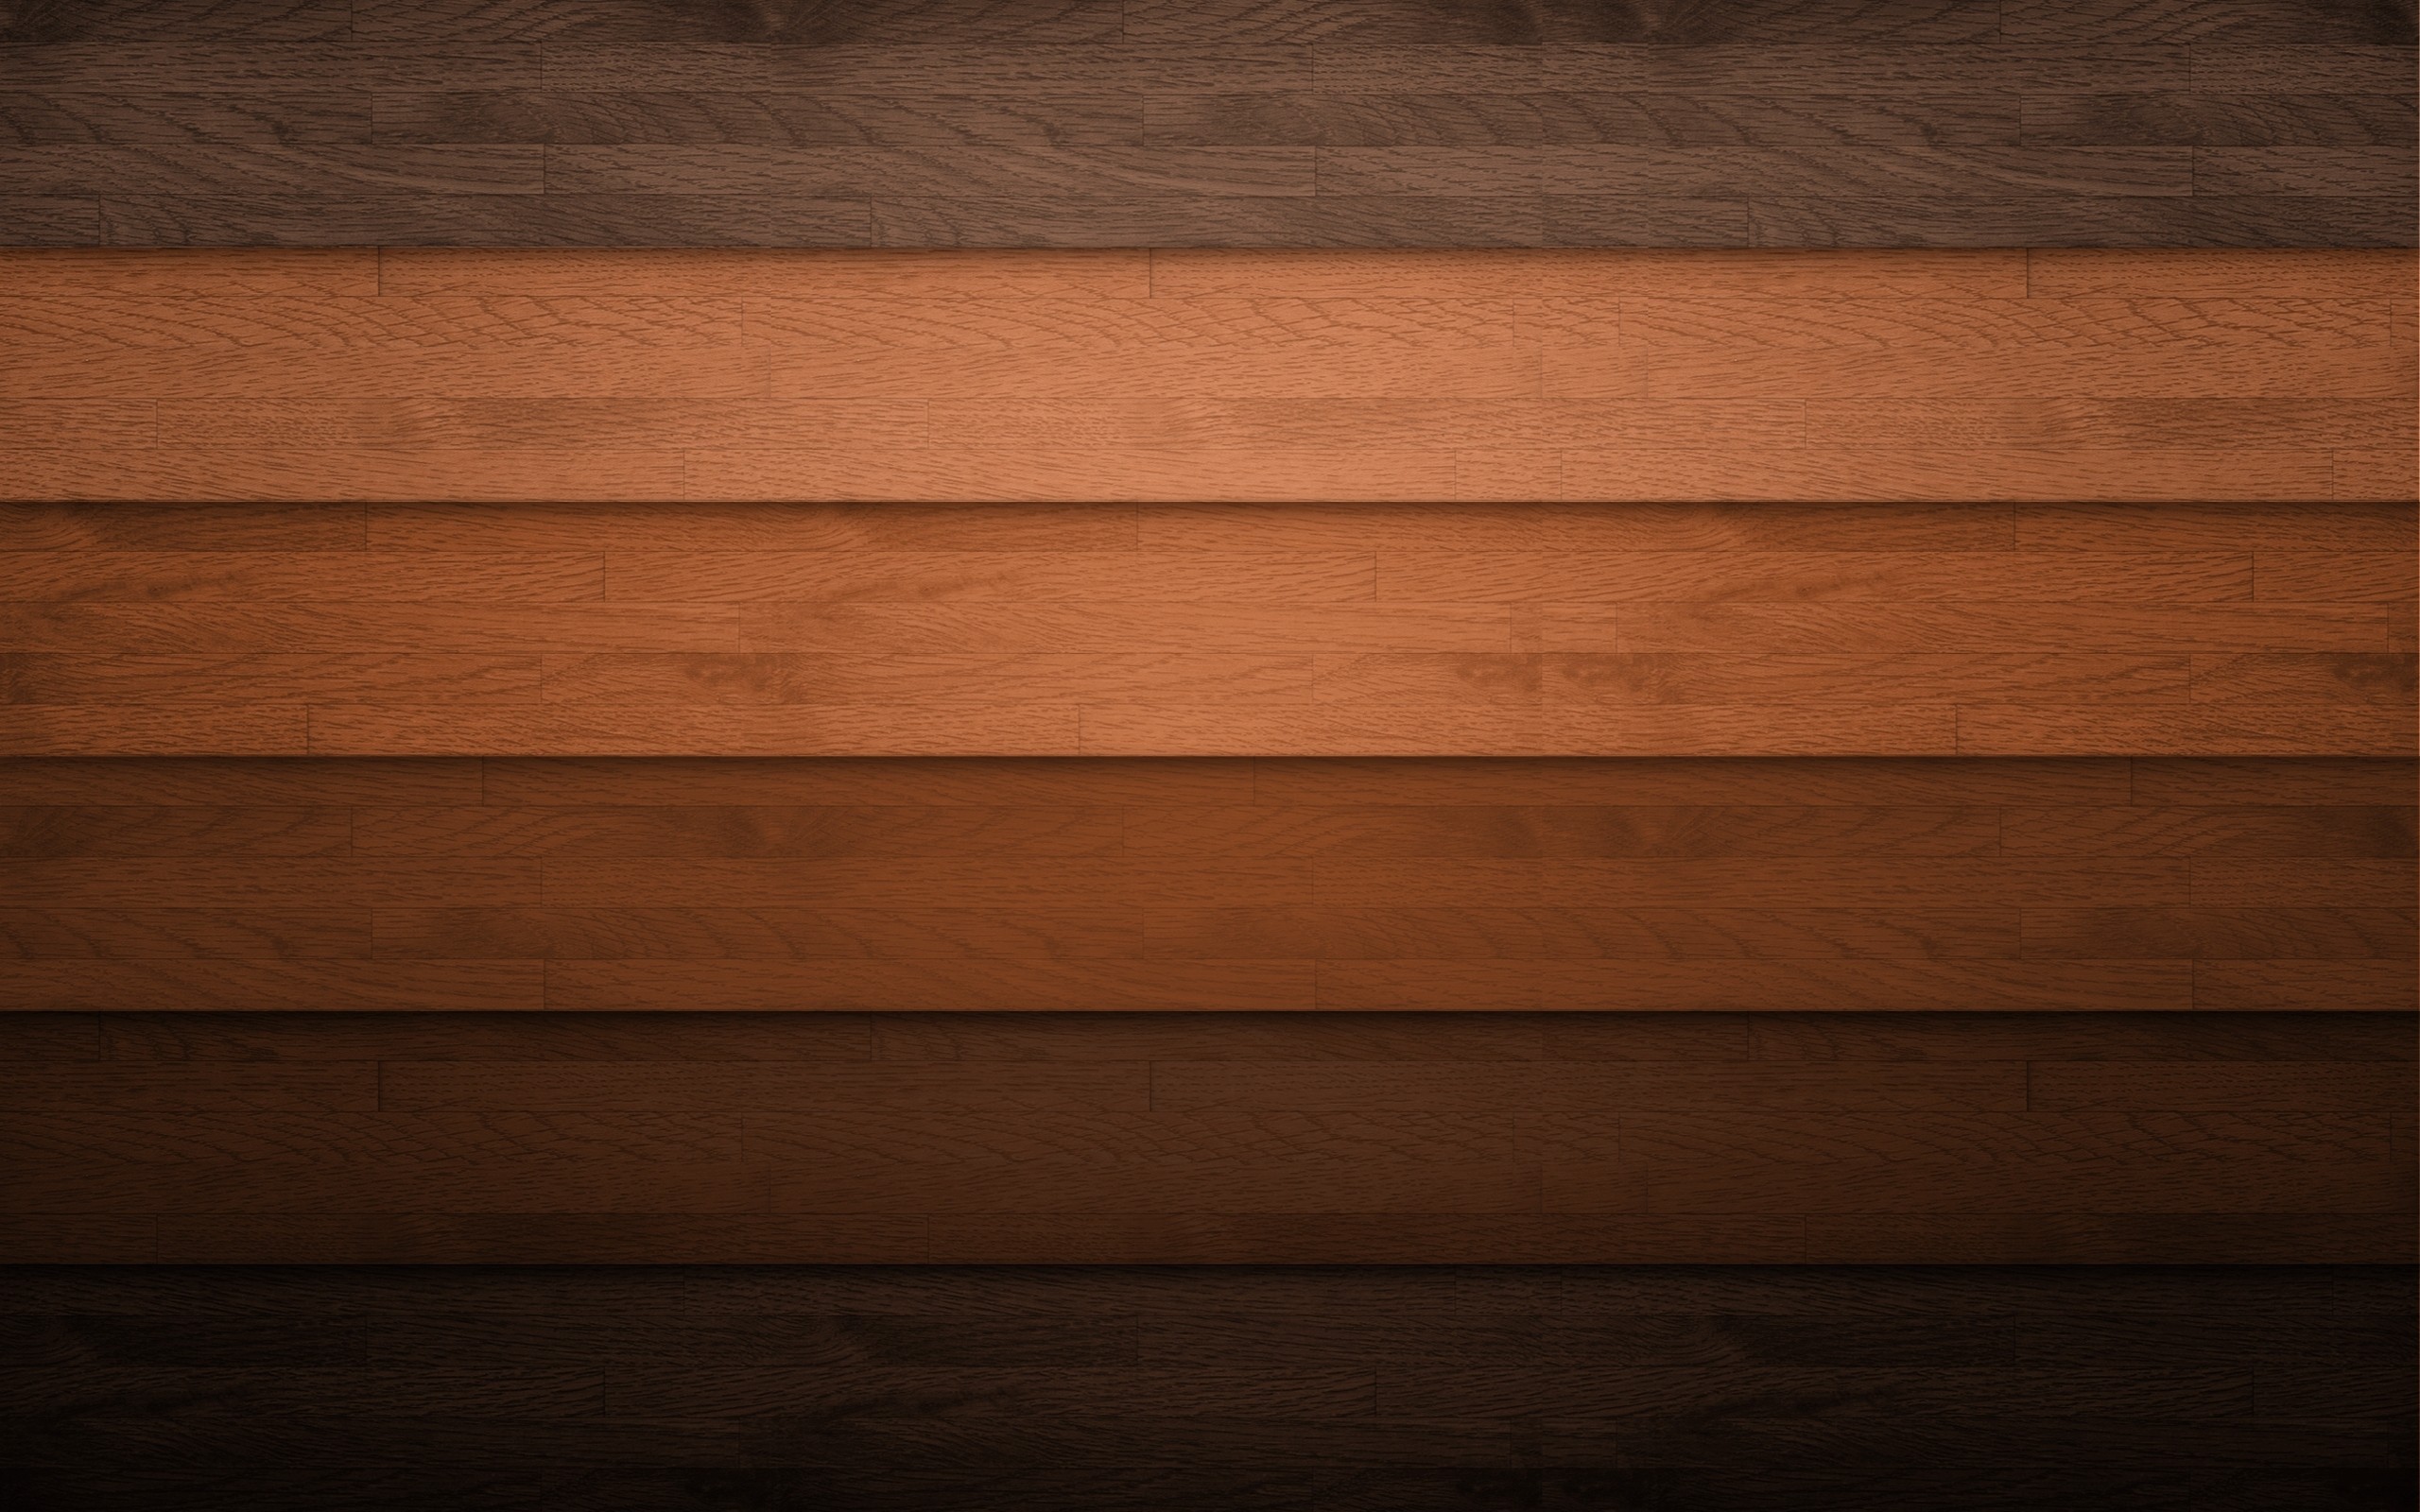 General 2560x1600 wood wooden surface pattern texture